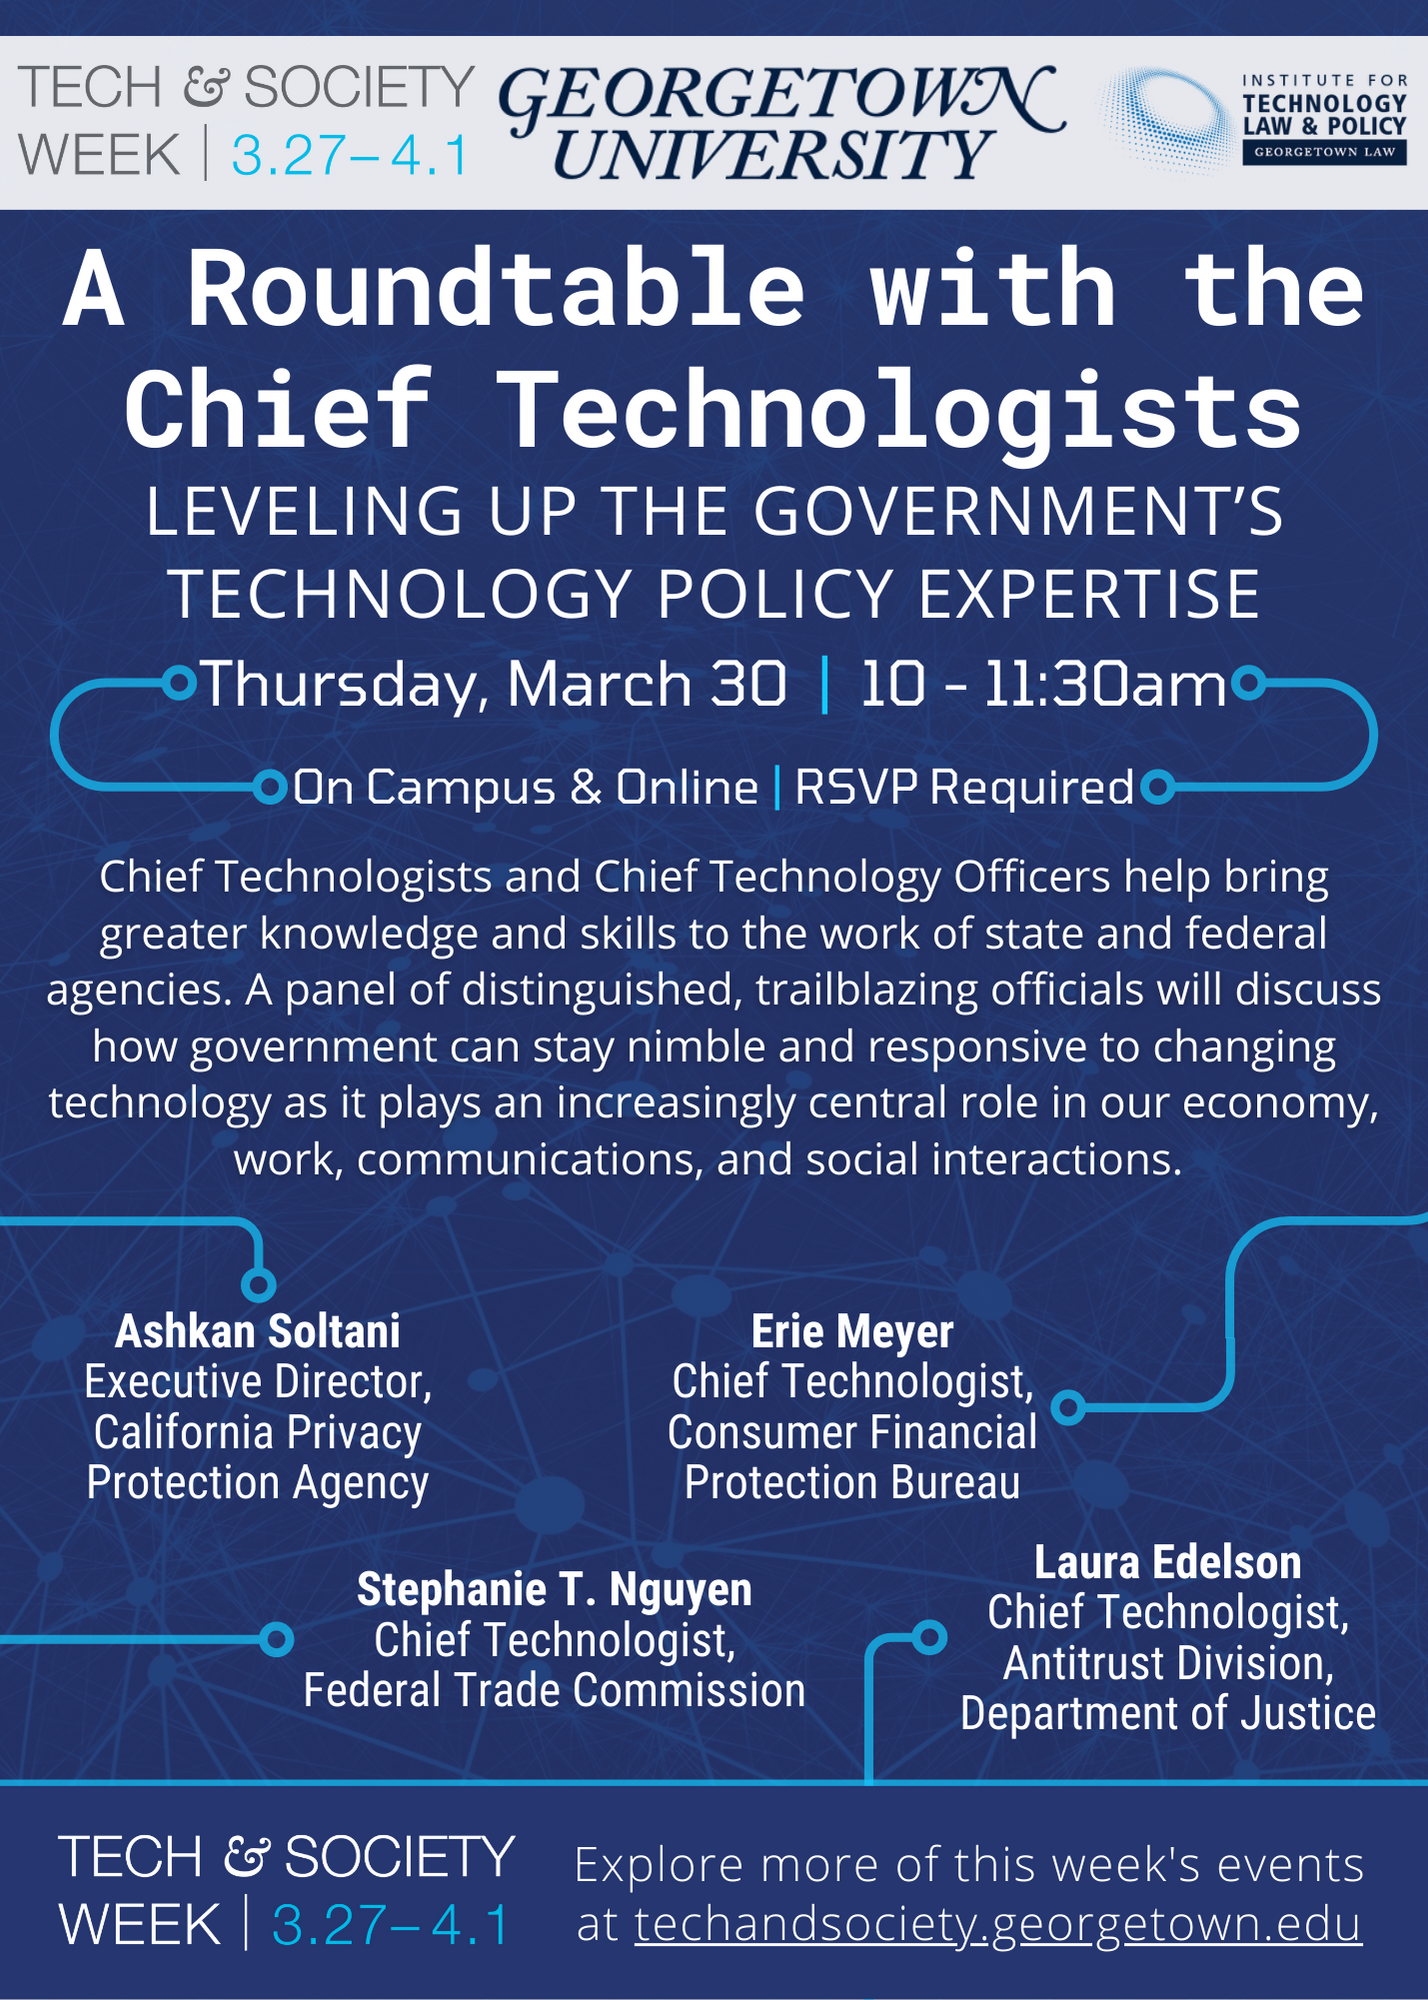 A Roundtable with the Chief Technologists: Leveling Up the Government’s Technology Policy Expertise - RSVP Form